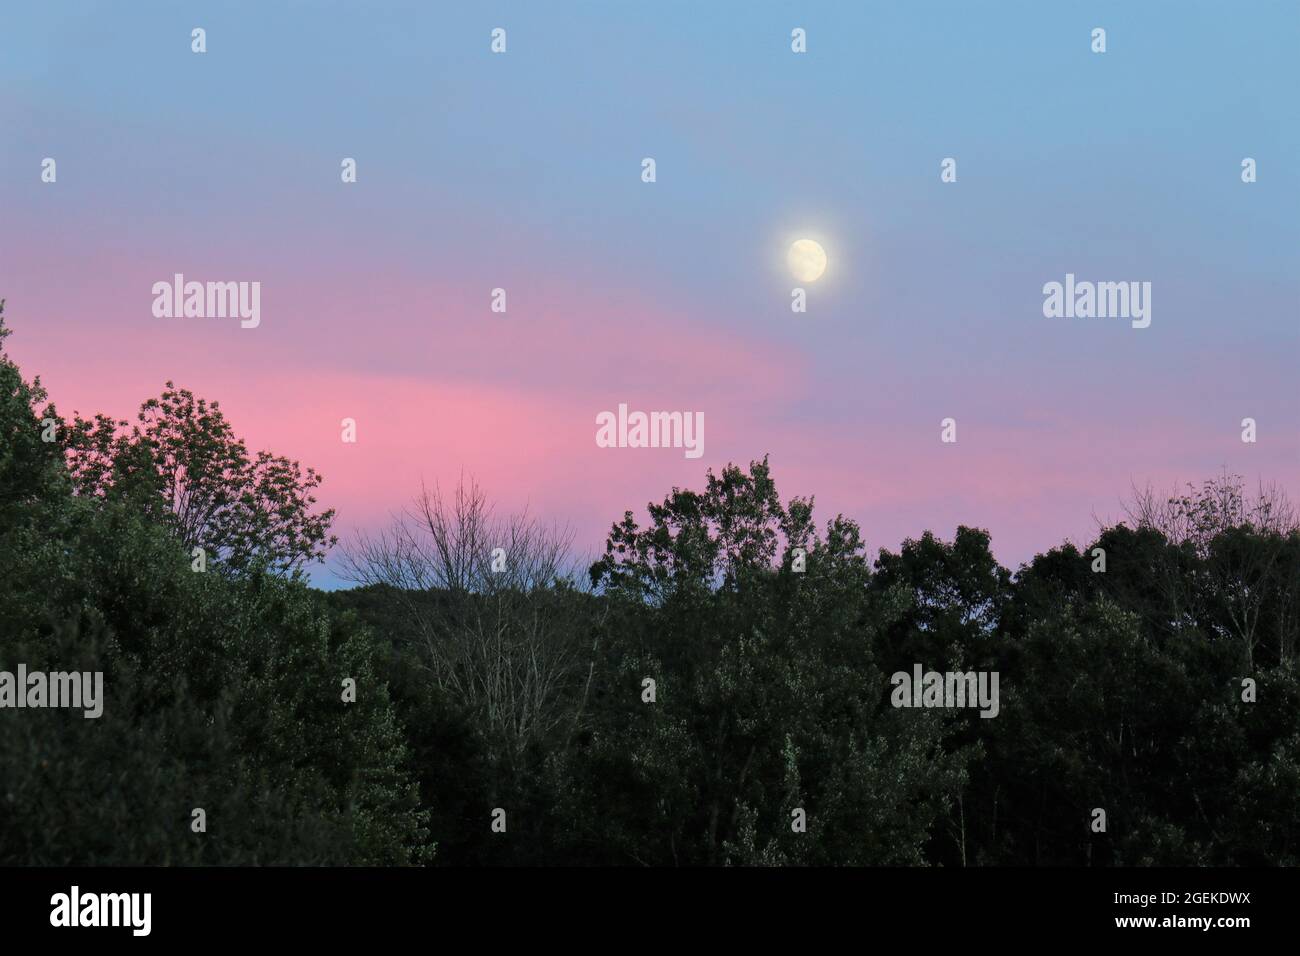 waxing gibbous August moon rising above dark trees and pink glowing clouds in a hazy sky Stock Photo